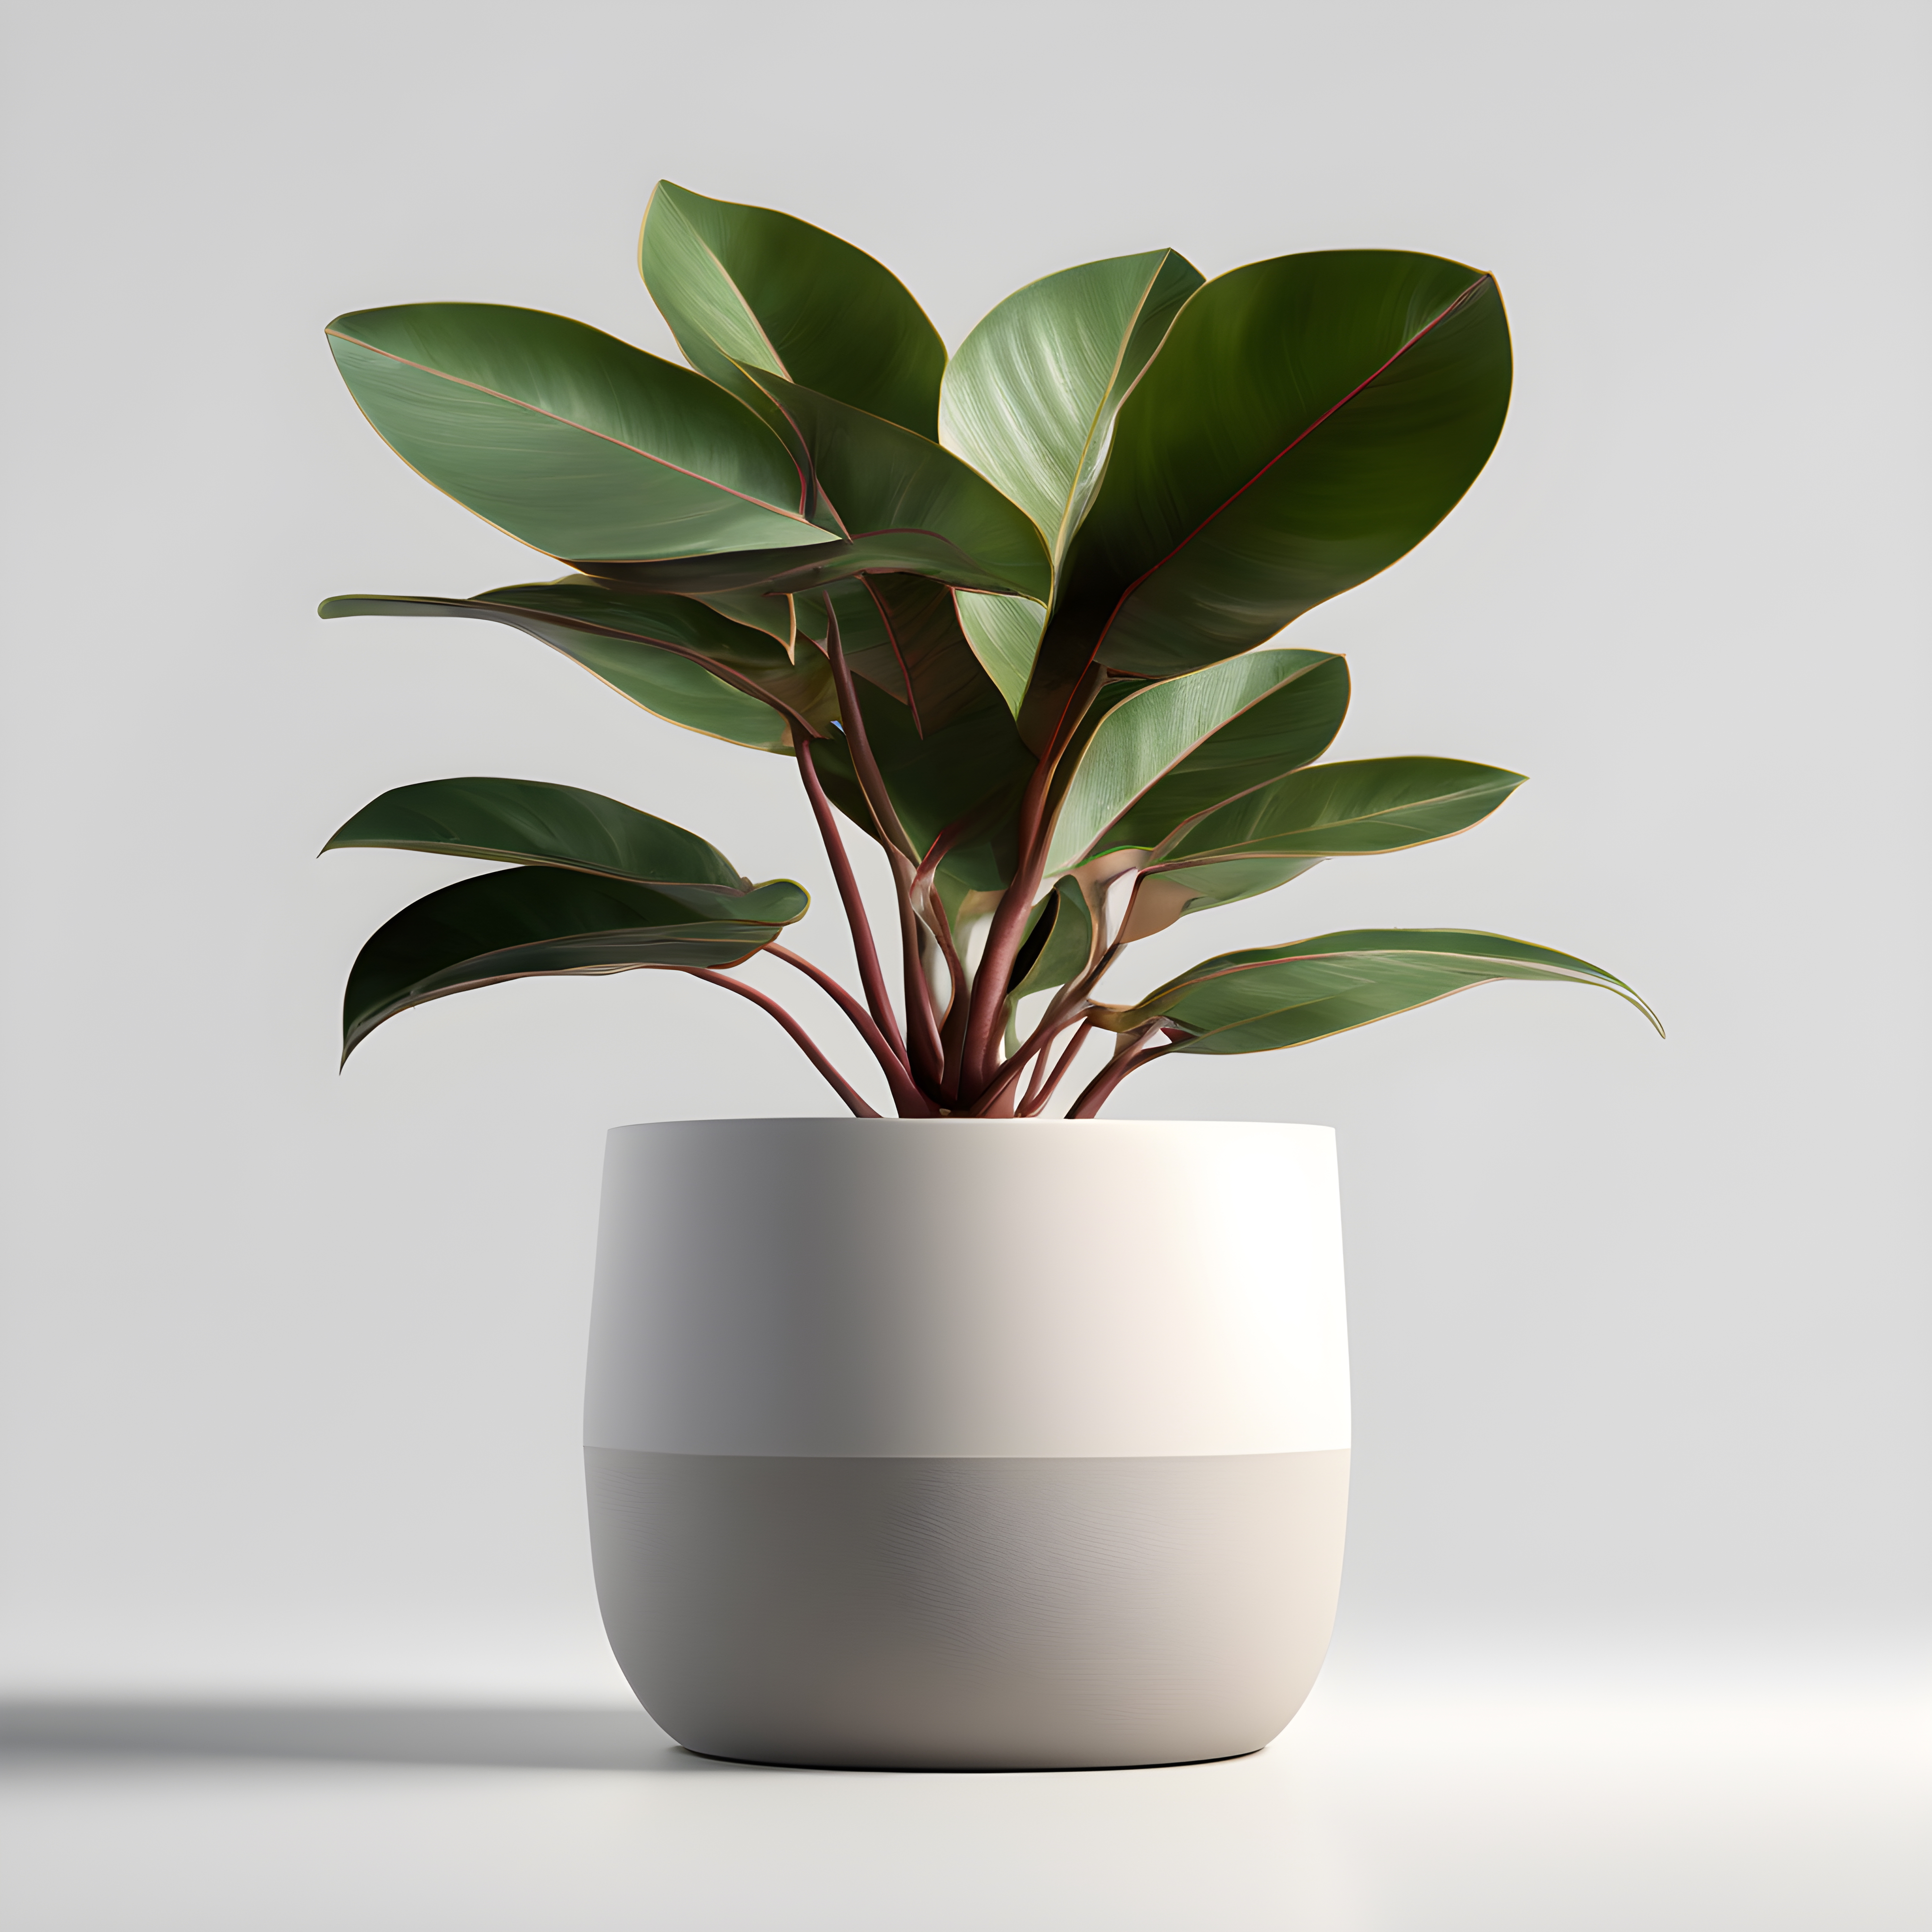 Rubber Plant: Elegant dark leaves bring a touch of jungle greenery to your bedroom